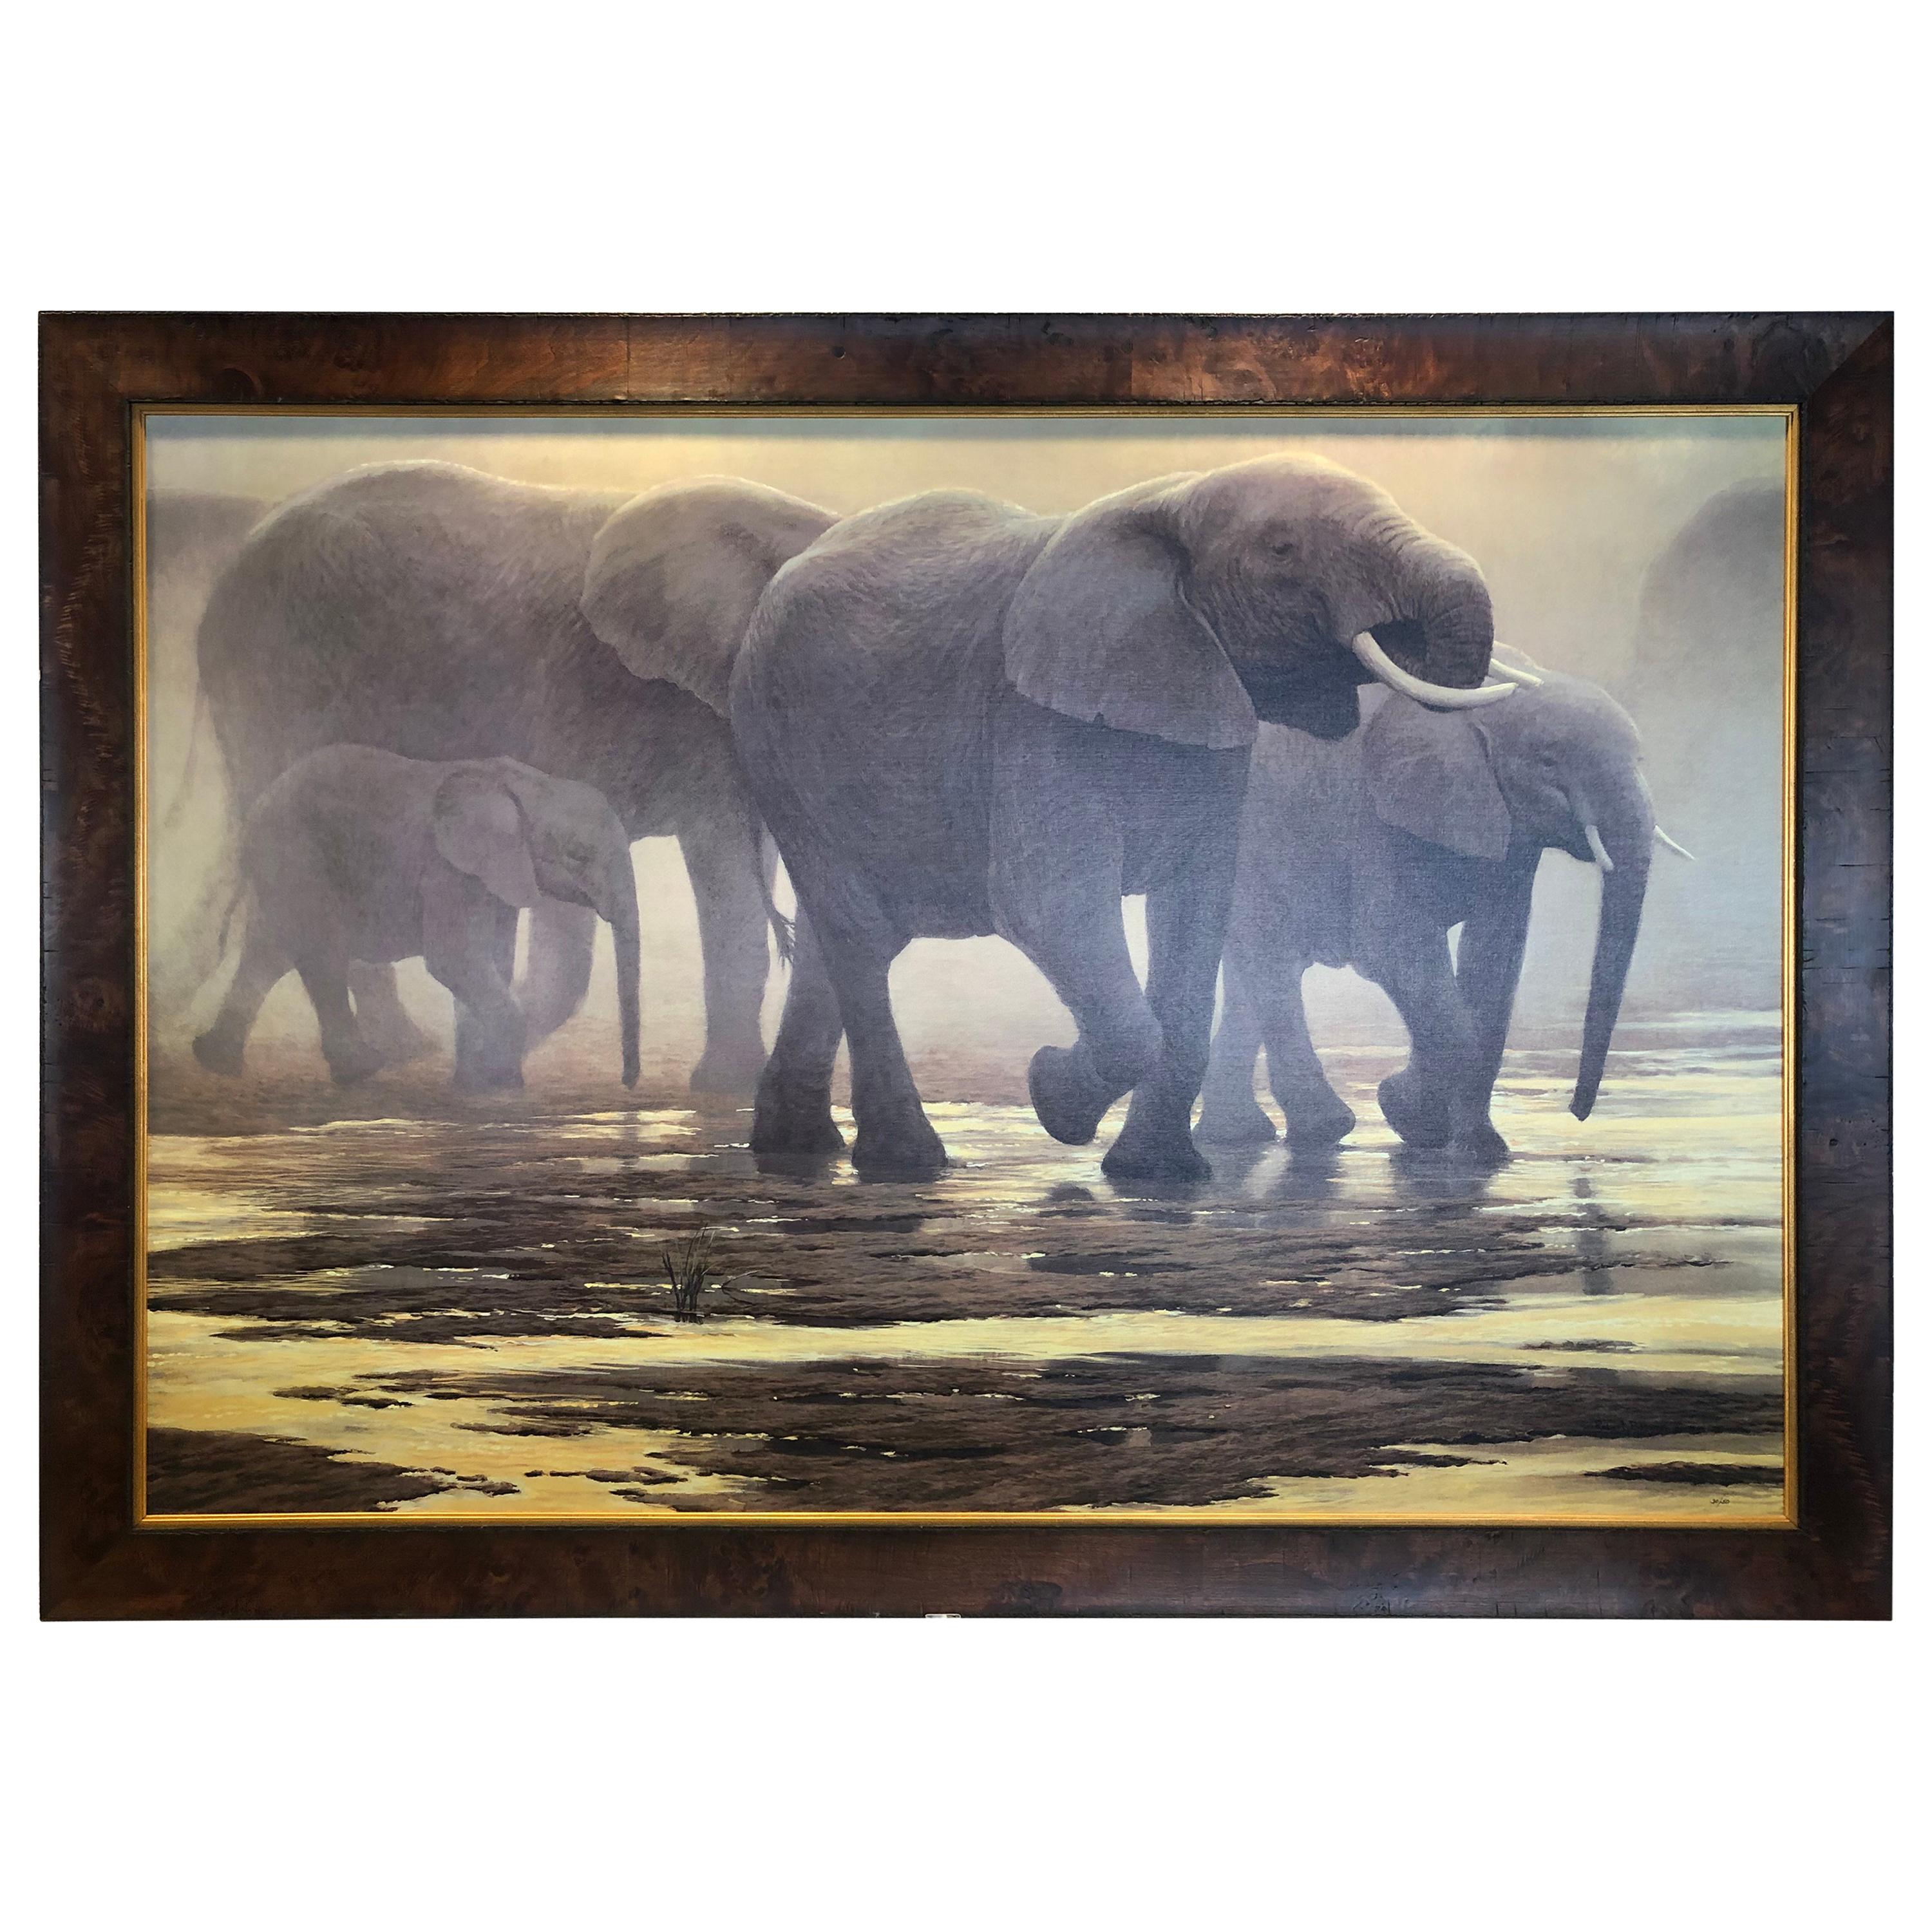 Limited Edition "By The River" by Robert Bateman